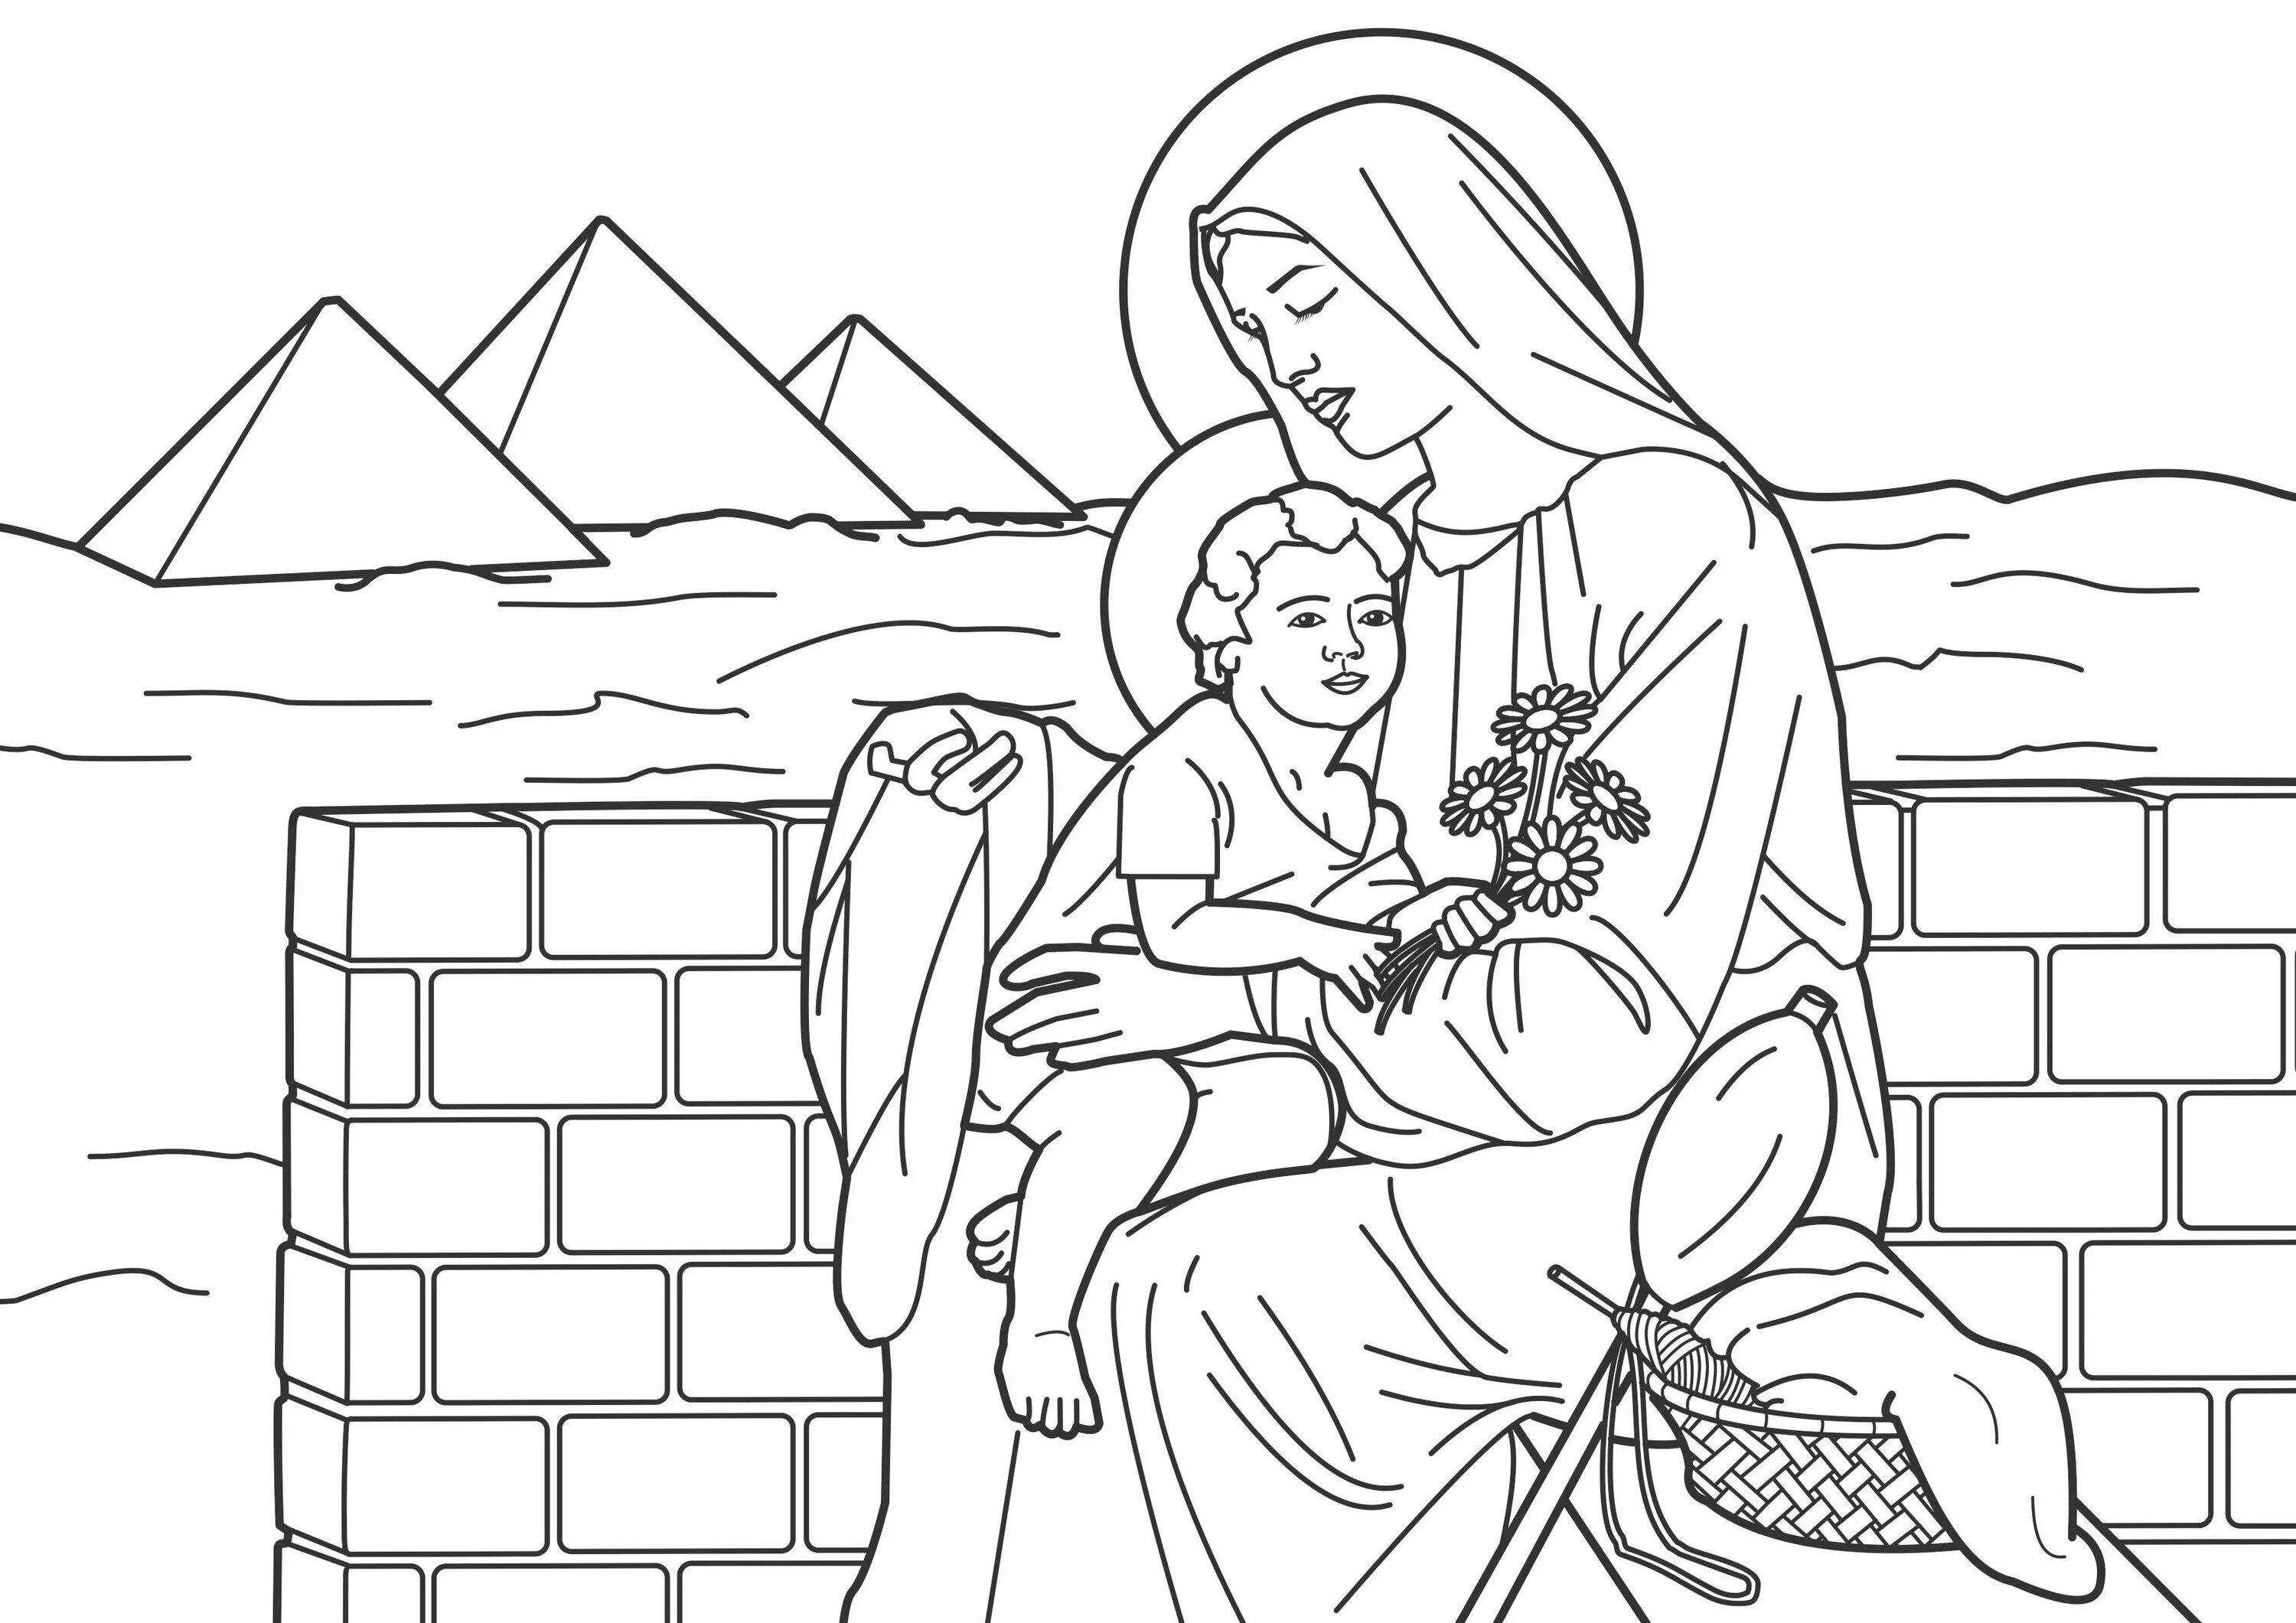 Coloring page luxury orthodox holiday